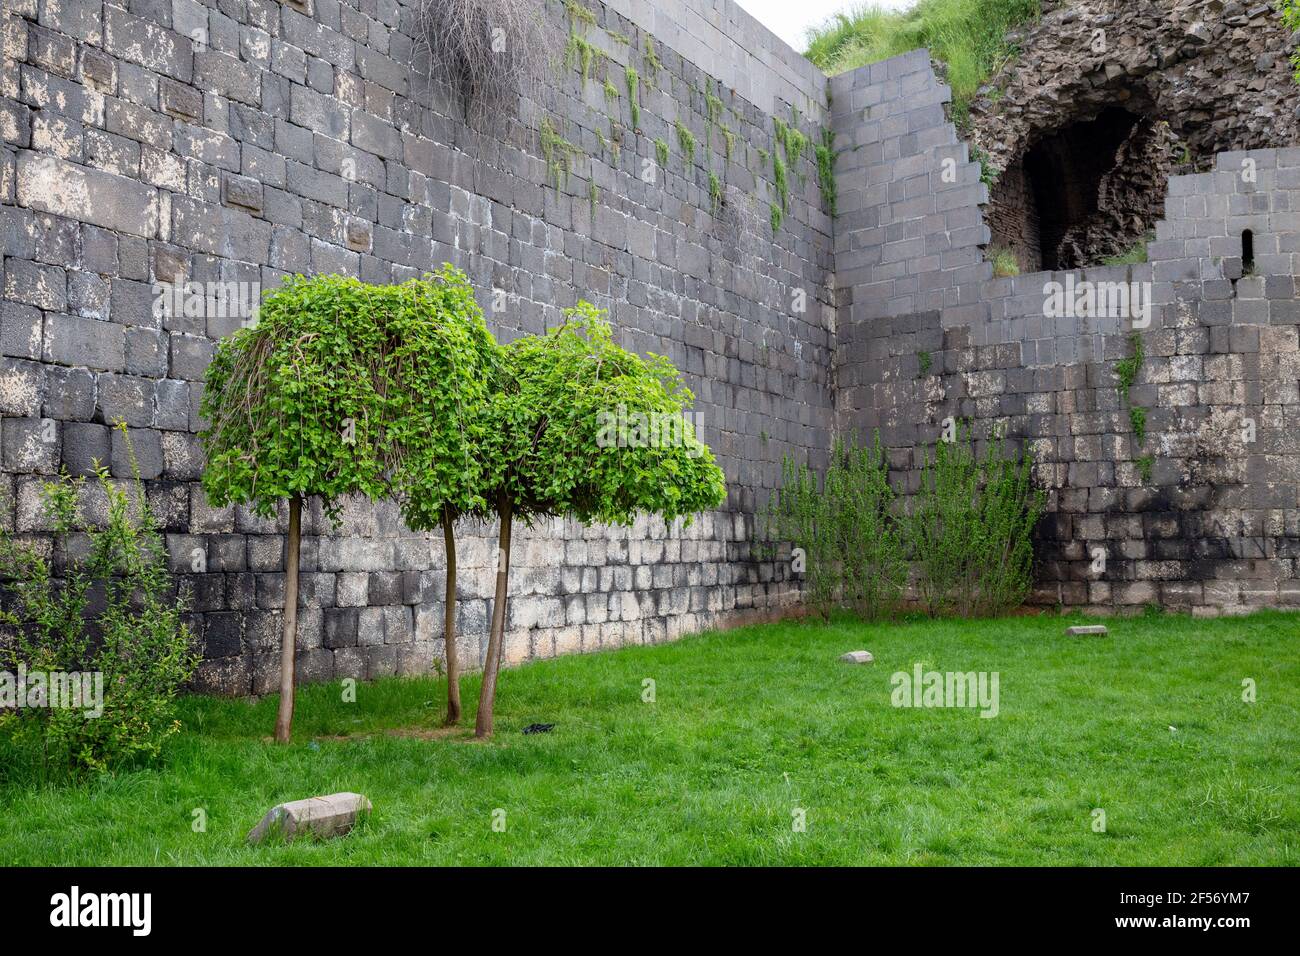 Old City Walls in the city of Diyarbakir, Turkey. People walk around the city walls and rest. Stock Photo